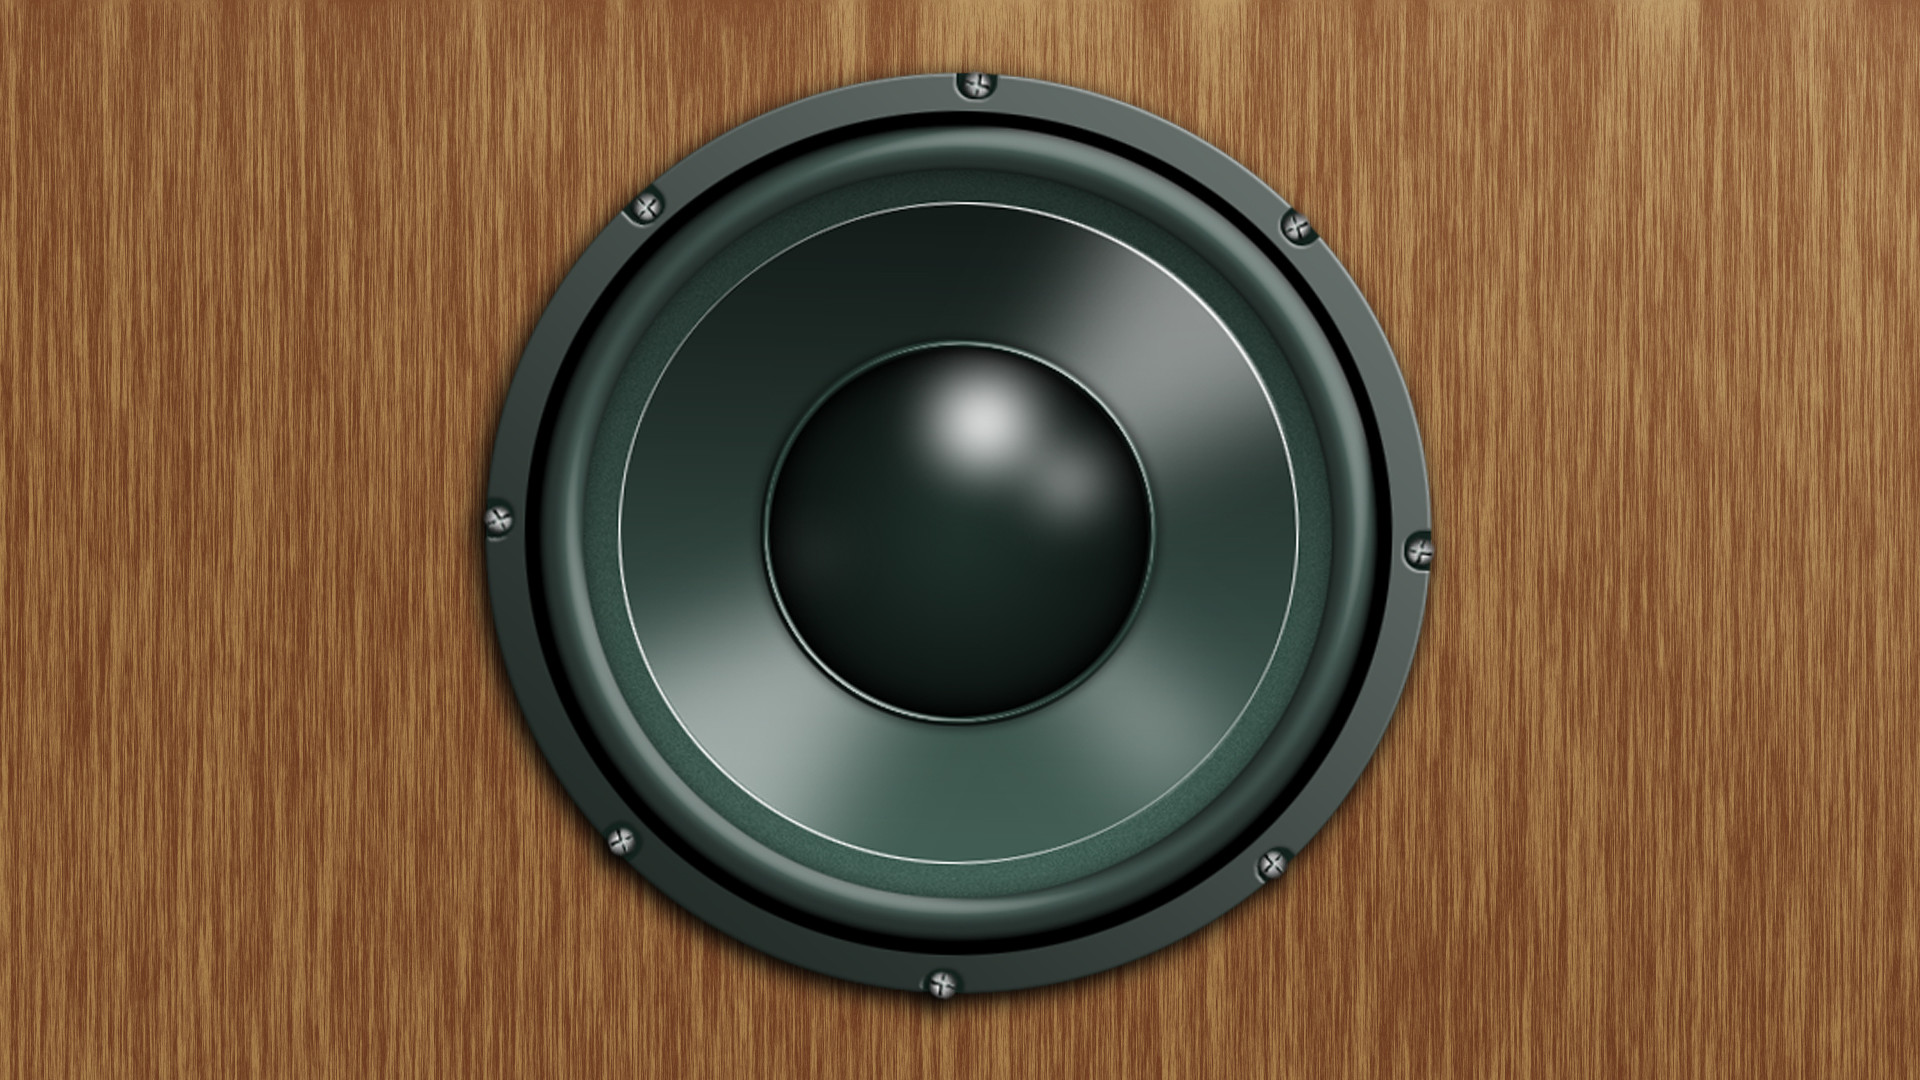 1920x1080 Subwoofer - Photoshop CS6 by WarrenCarr Subwoofer - Photoshop CS6 by  WarrenCarr